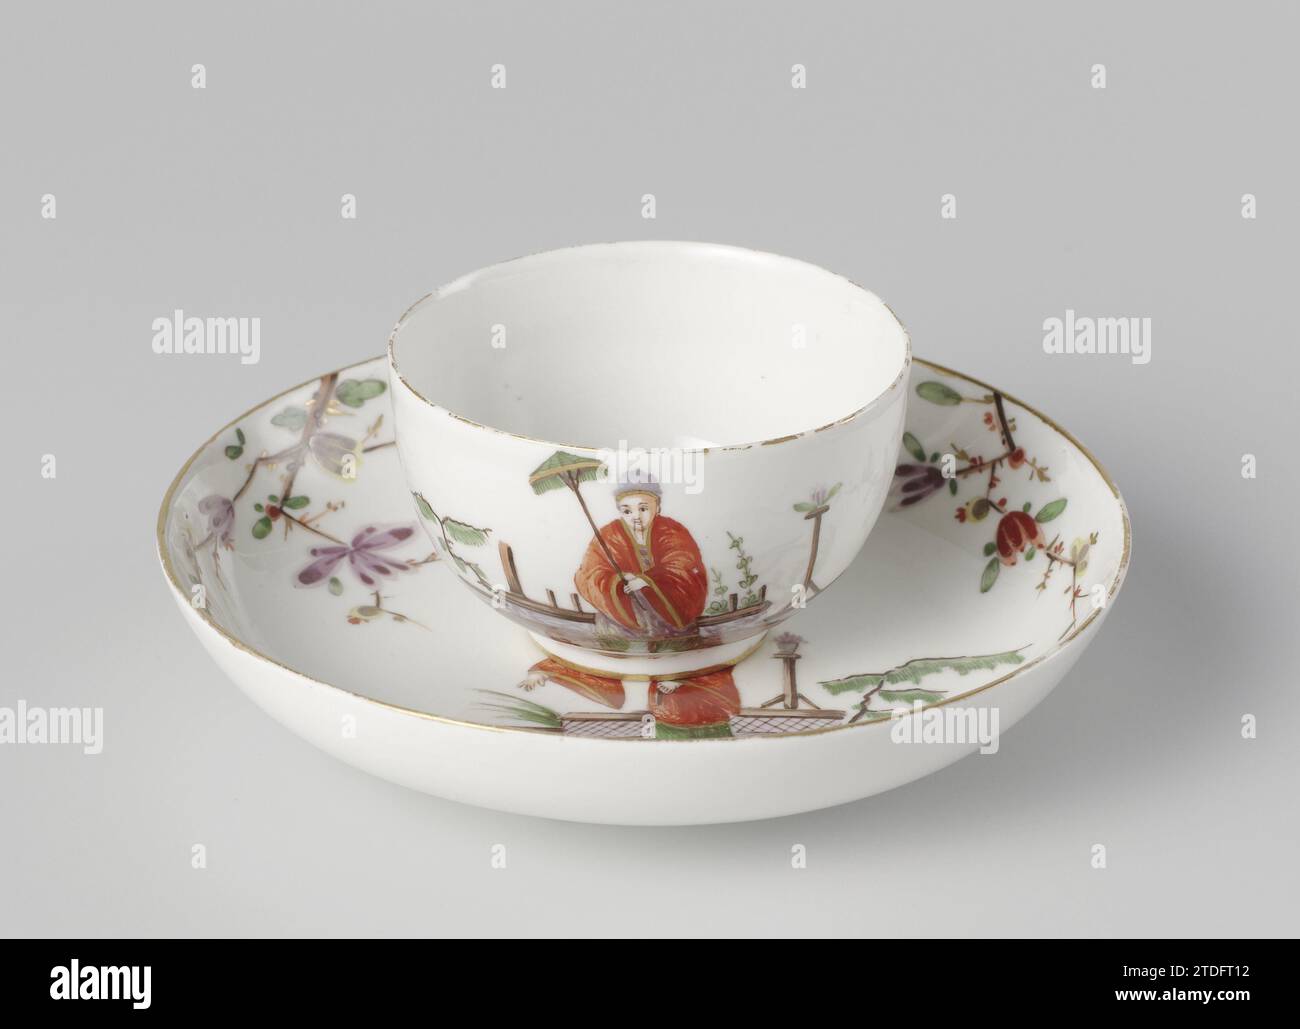 Cup and Saucer, Weesper Porseleinfabriek, c. 1765 - c. 1770 Kop (BK-1982-62-B) and Schotel (BK-1982-62-A), multi-colored decorated with chinoiseries. Golden piping along the edges. Marked with two crossed swords and three bulbs in under -glaze blue. Weesp porcelain Kop (BK-1982-62-B) and Schotel (BK-1982-62-A), multi-colored decorated with chinoiseries. Golden piping along the edges. Marked with two crossed swords and three bulbs in under -glaze blue. Weesp porcelain Stock Photo